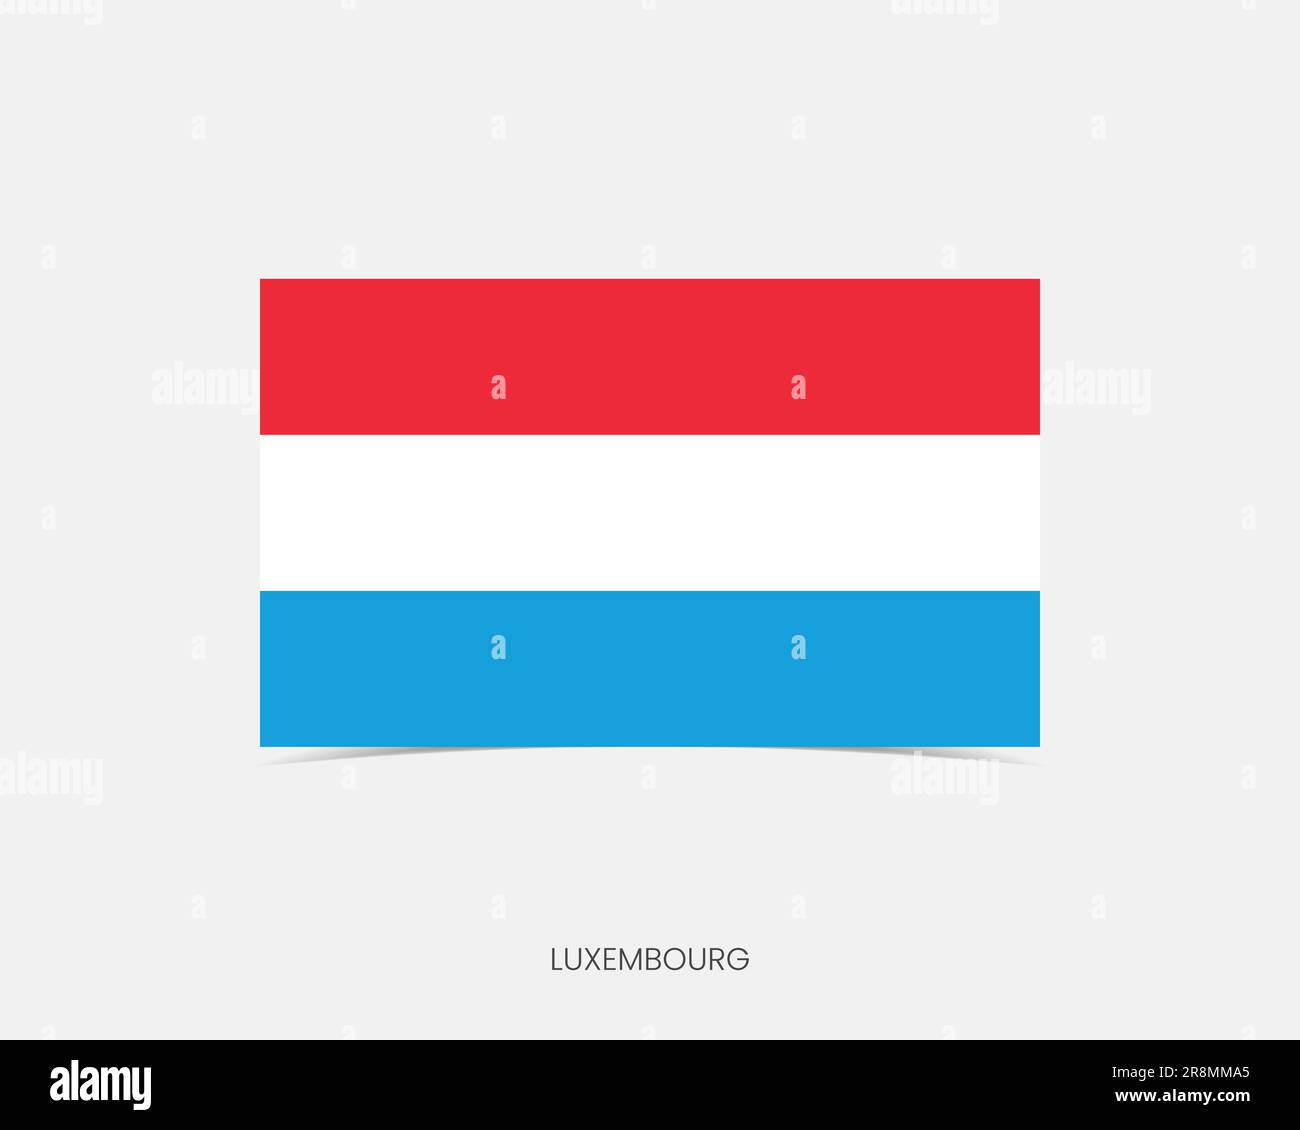 Luxembourg Rectangle flag icon with shadow. Stock Vector